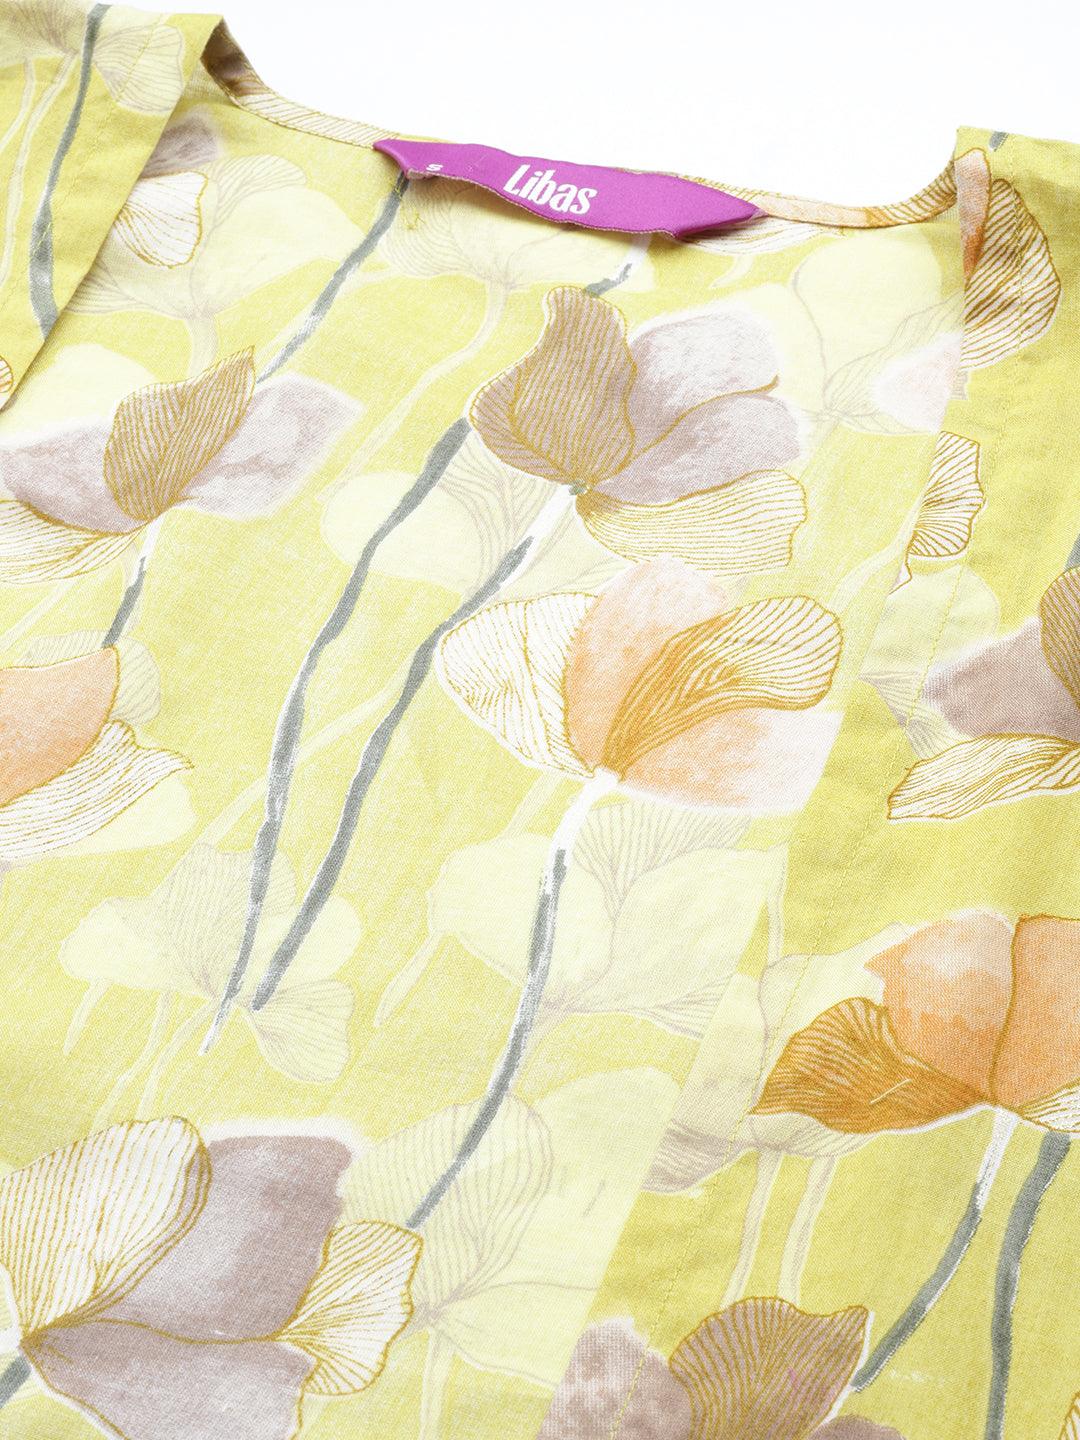 Lime Yellow Printed Cotton Co-Ords - Libas